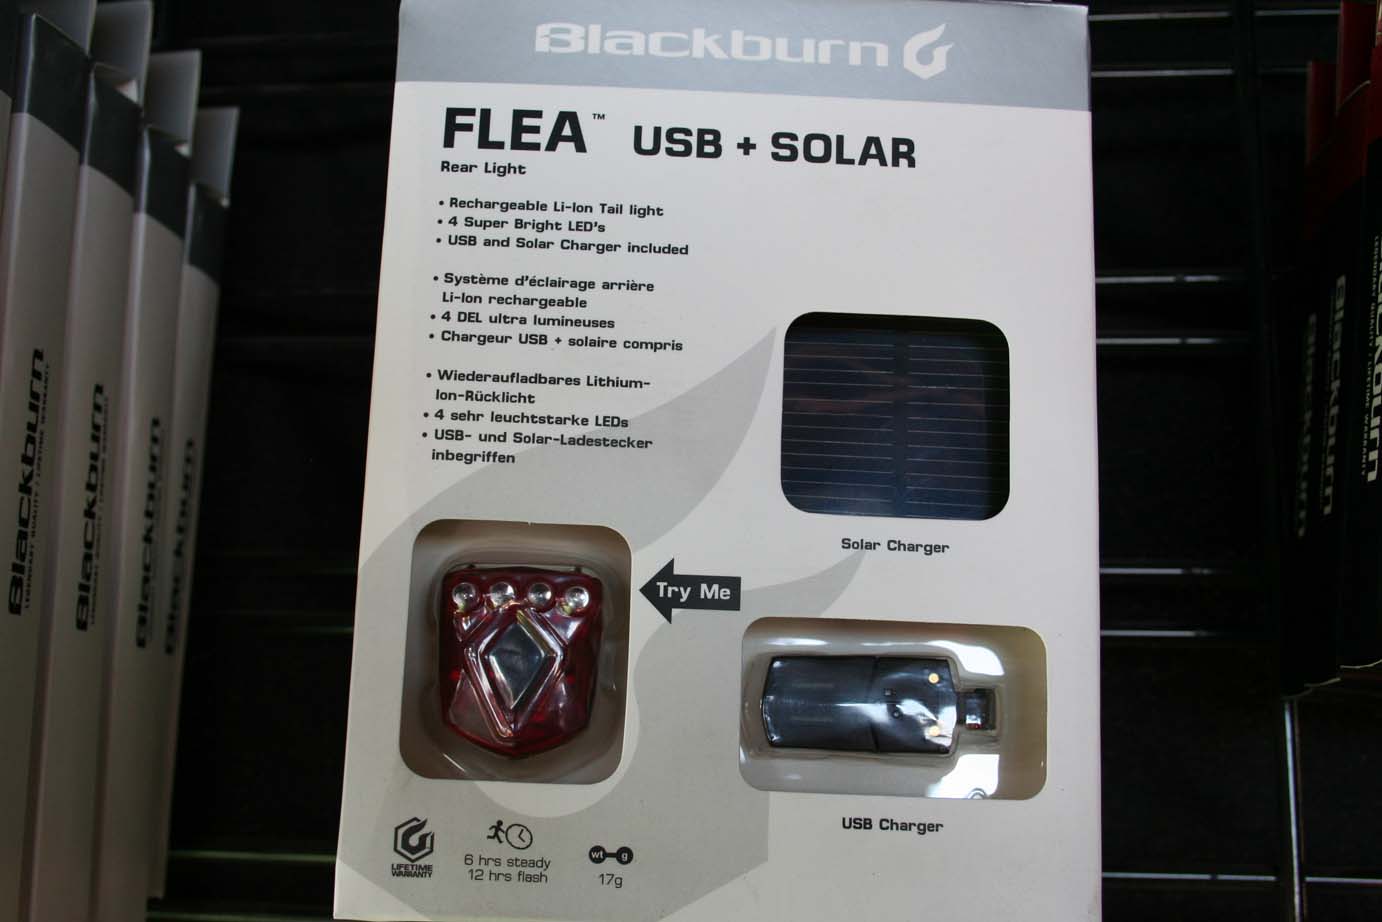 Blackburn offers a new USB and Solar-charged LED light, in front or rear formats.